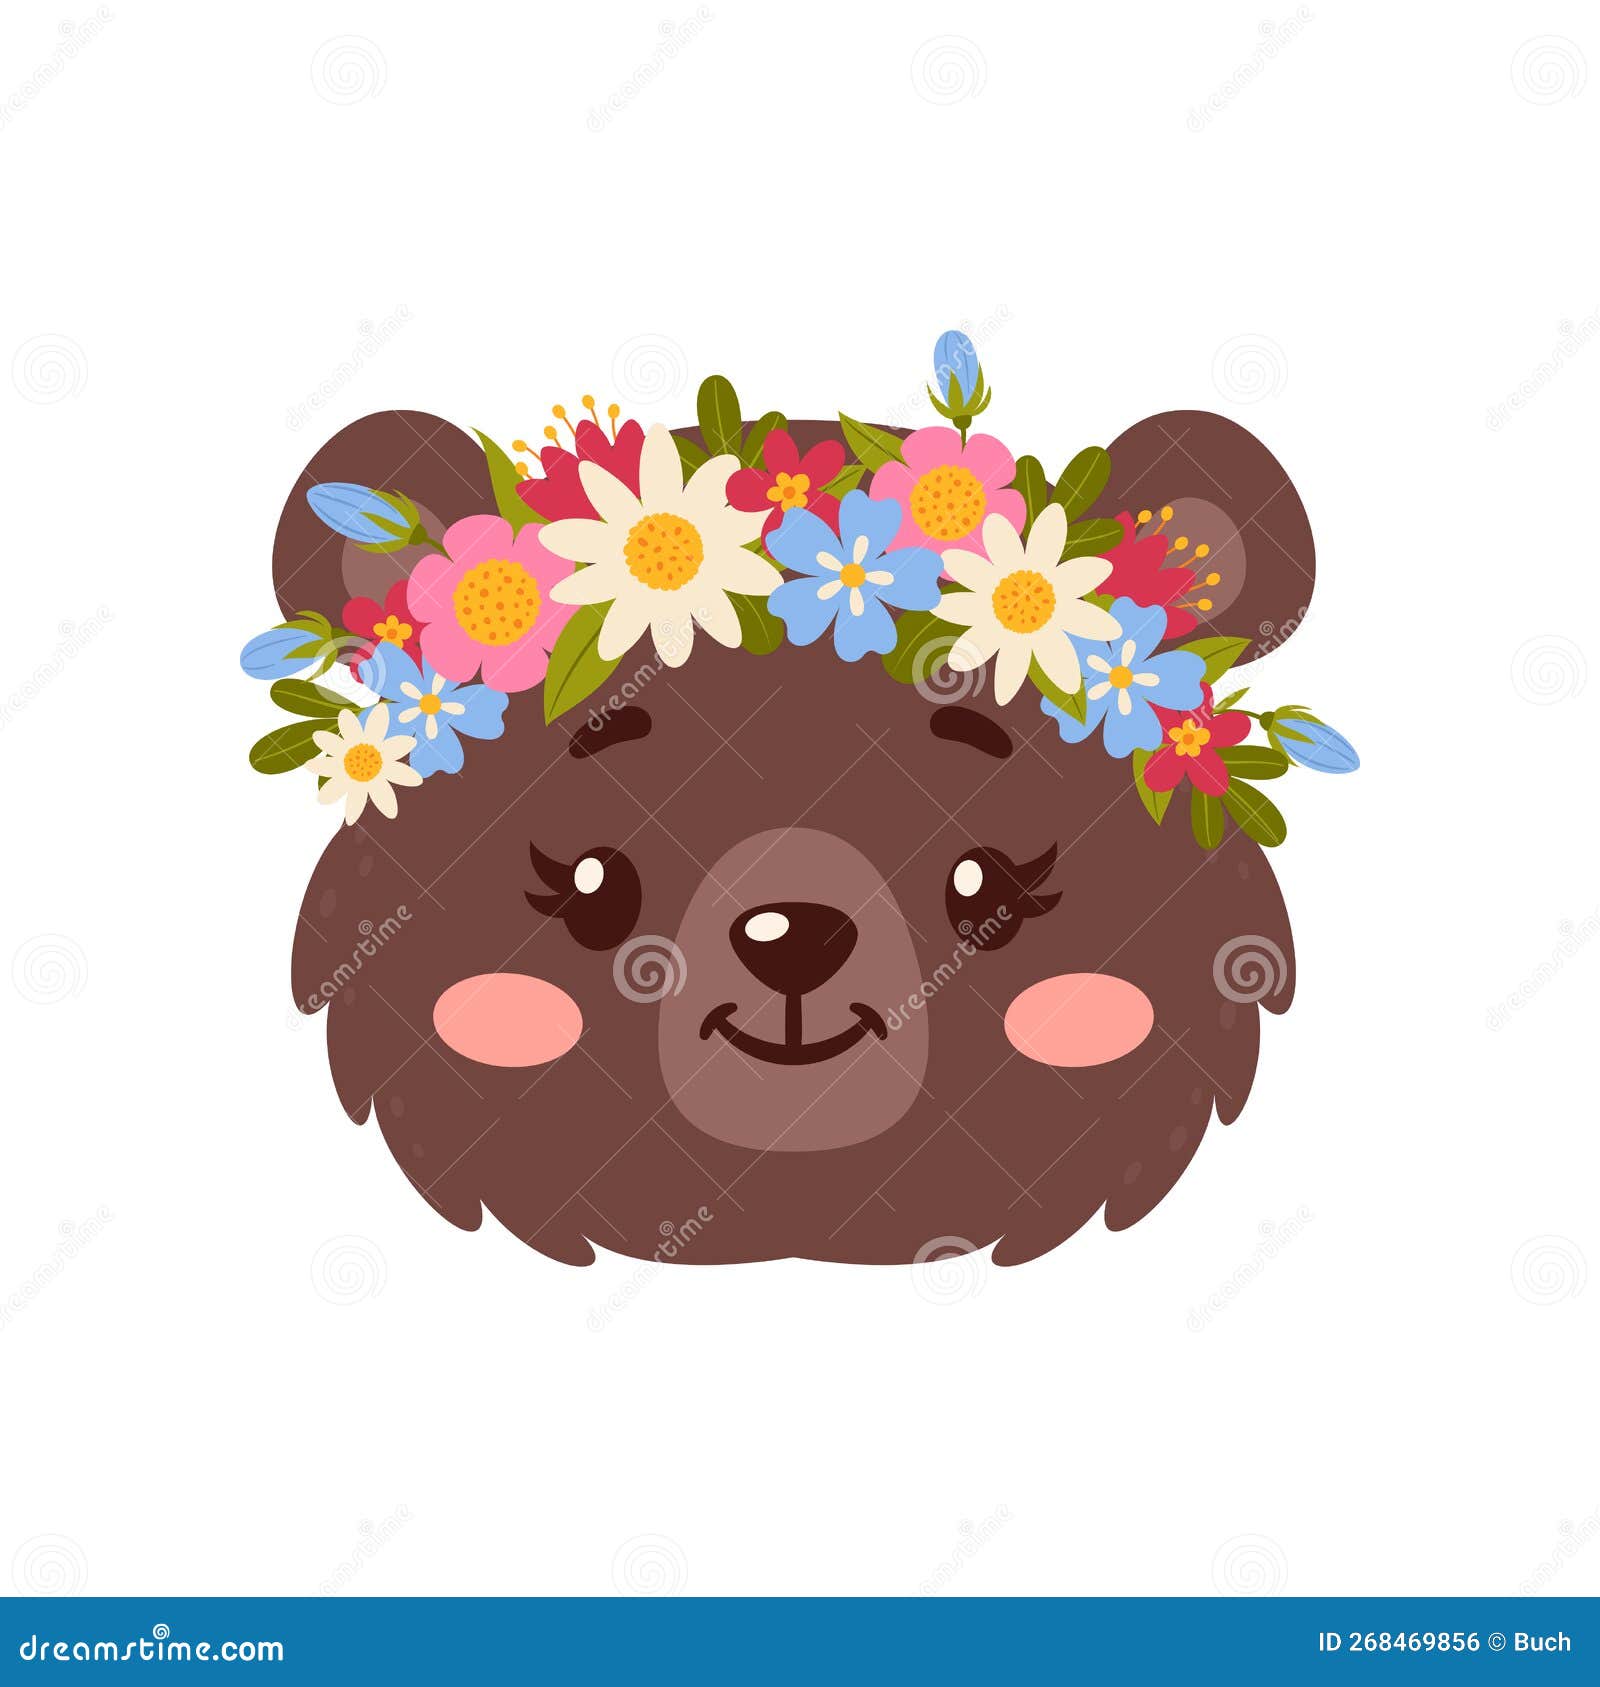 Bear Cute Animal in Flower Wreath Crown, Grizzly Stock Vector ...